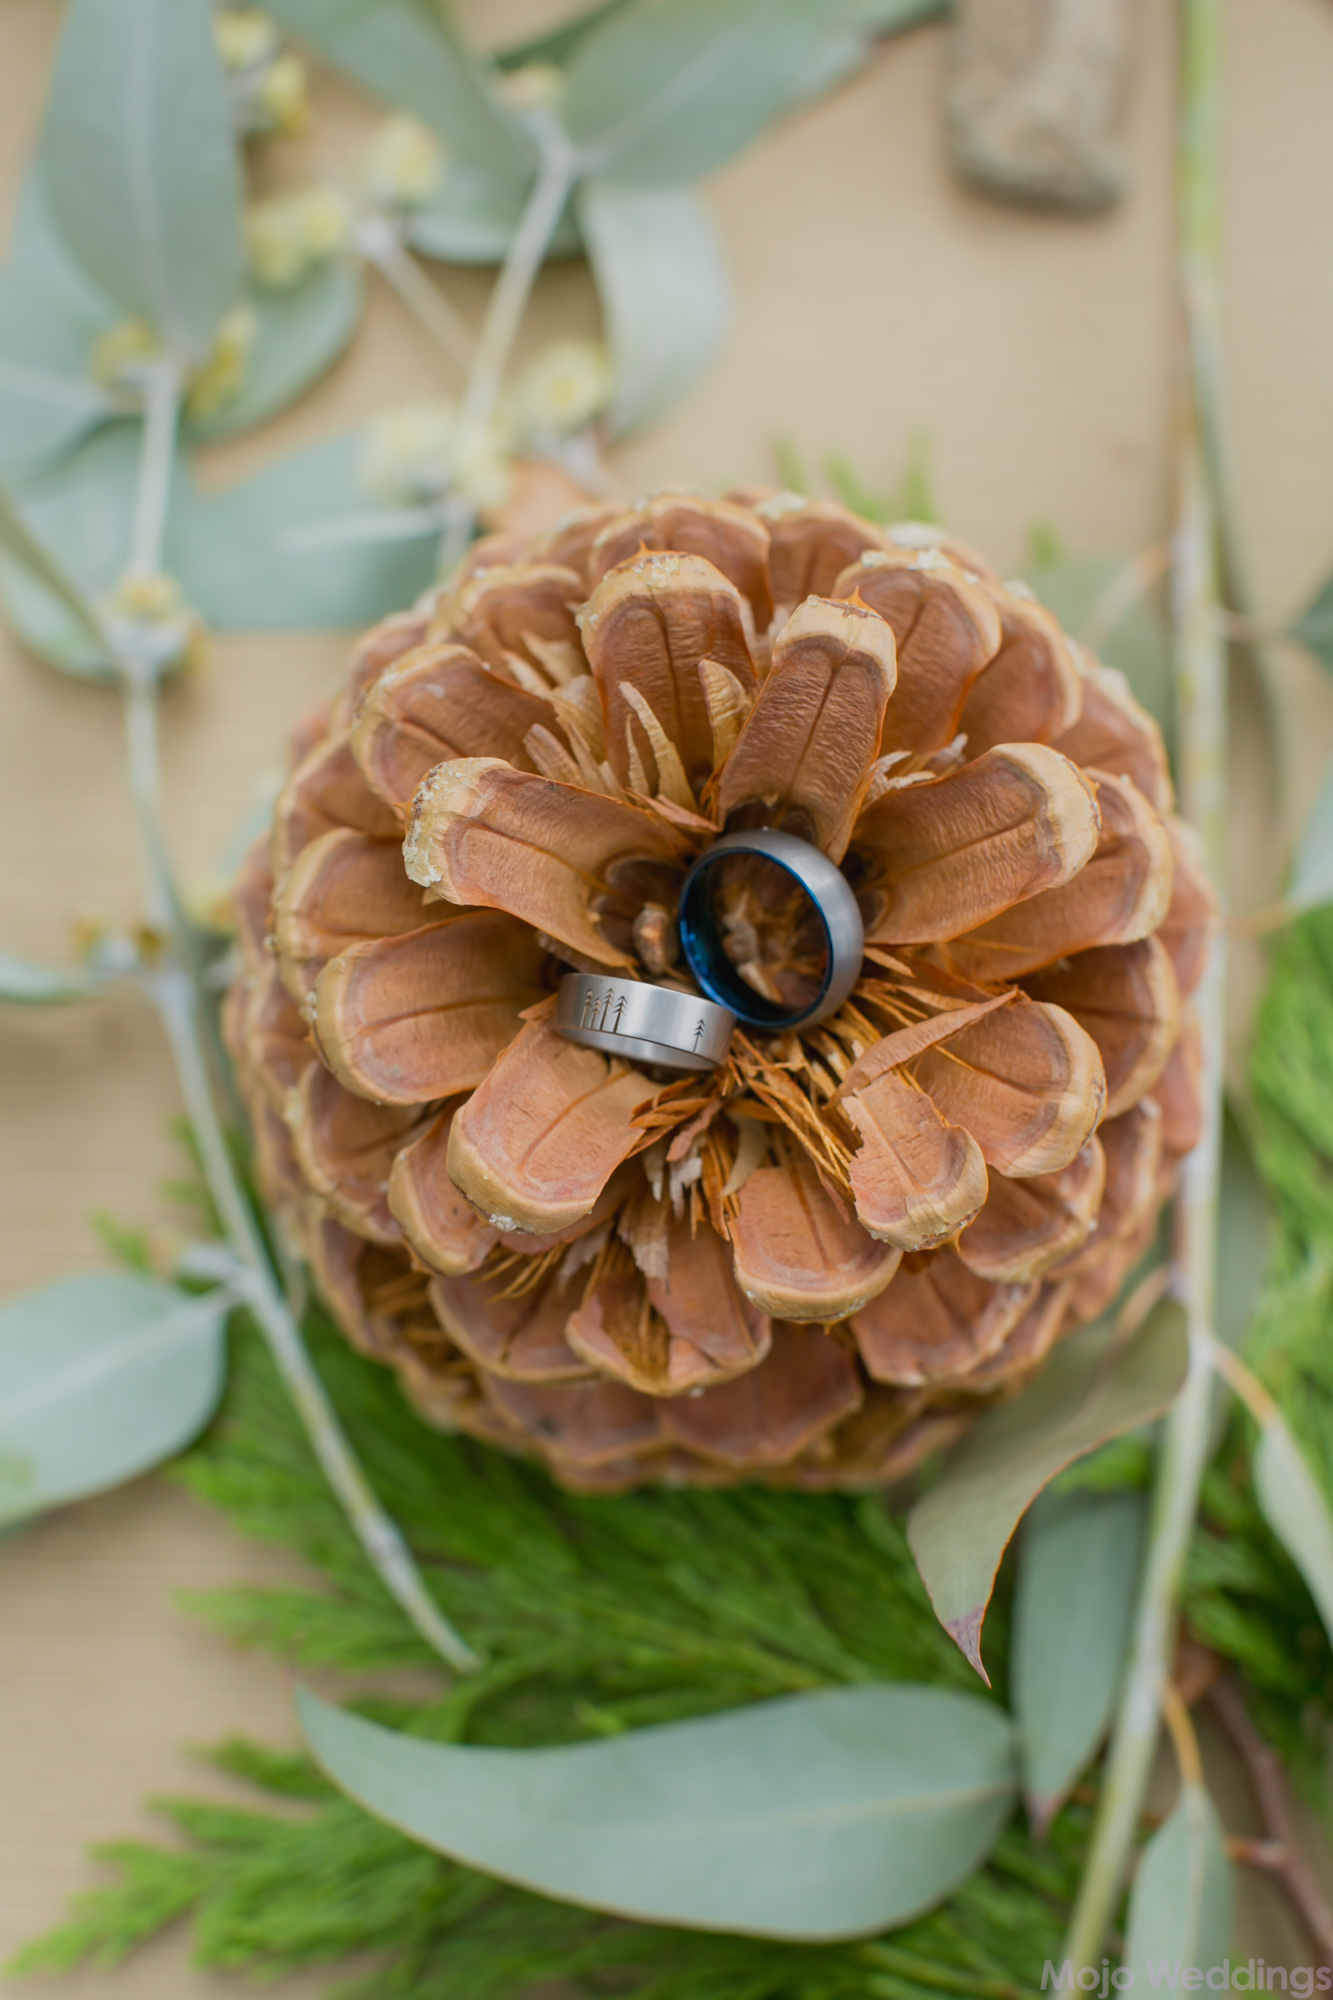 Her custom tree engraved wedding band and his dark grey band with a blue liner sit in the middle of the top of a pinecone.